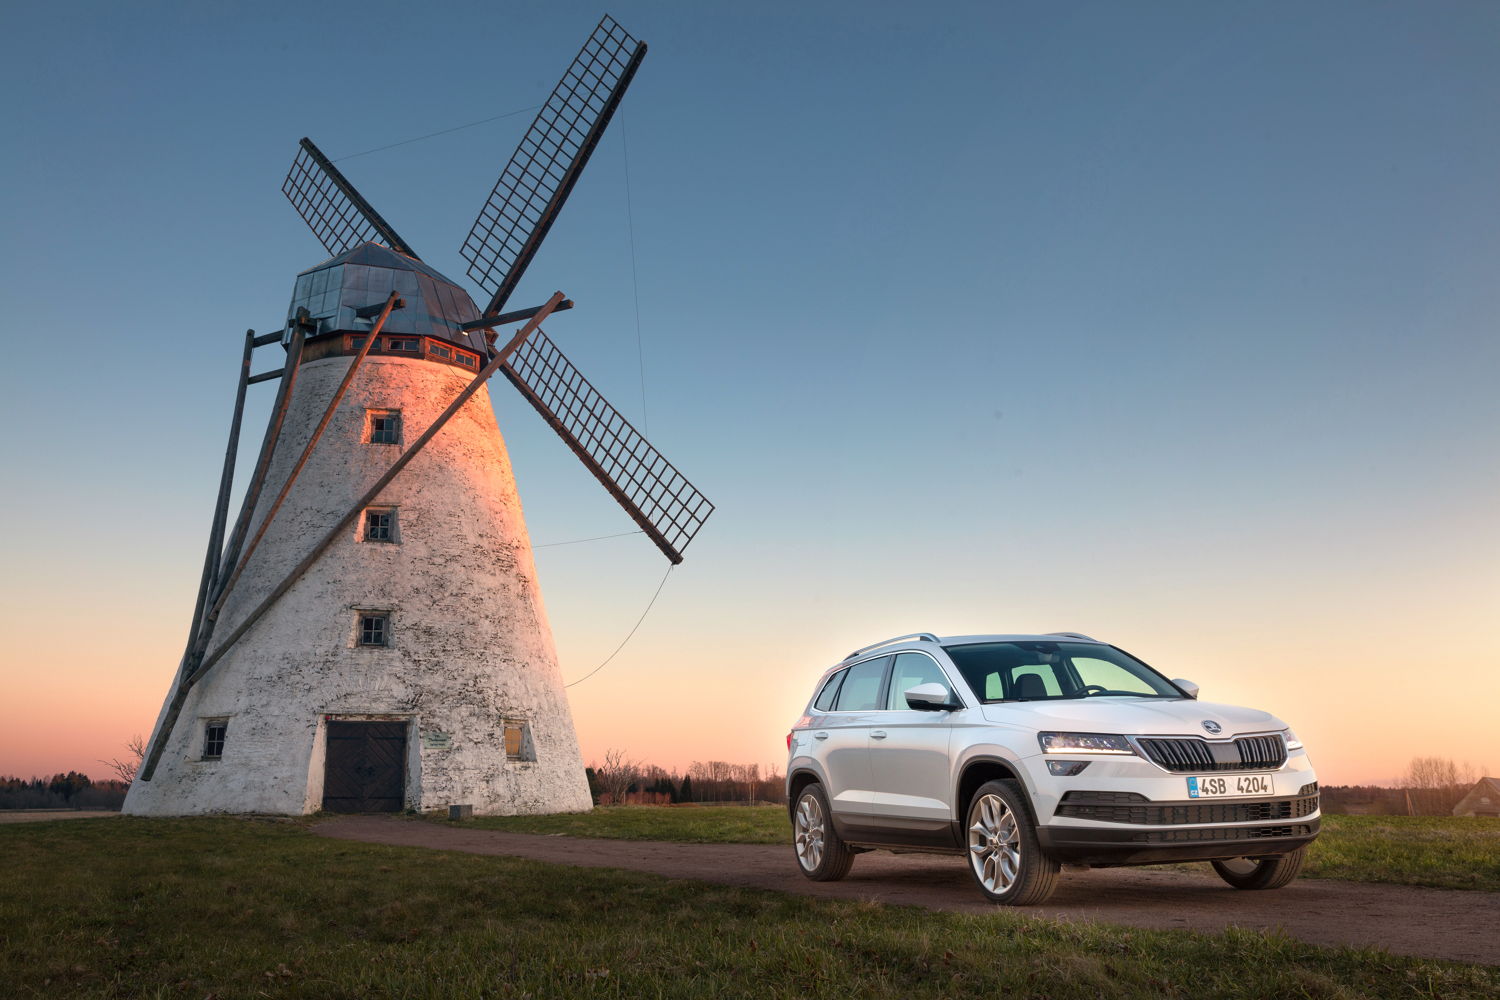 The ŠKODA KAROQ is a sport utility vehicle with character: its emotional and dynamic design with numerous crystalline elements showcases ŠKODA’s new design language. The compact SUV measures 4382 mm in length, 1841 mm in width and 1605 mm in height. The long wheelbase of 2638 millimetres guarantees plenty of room for passengers. The boot has a volume of 521 litres with the rear seats in the default position.